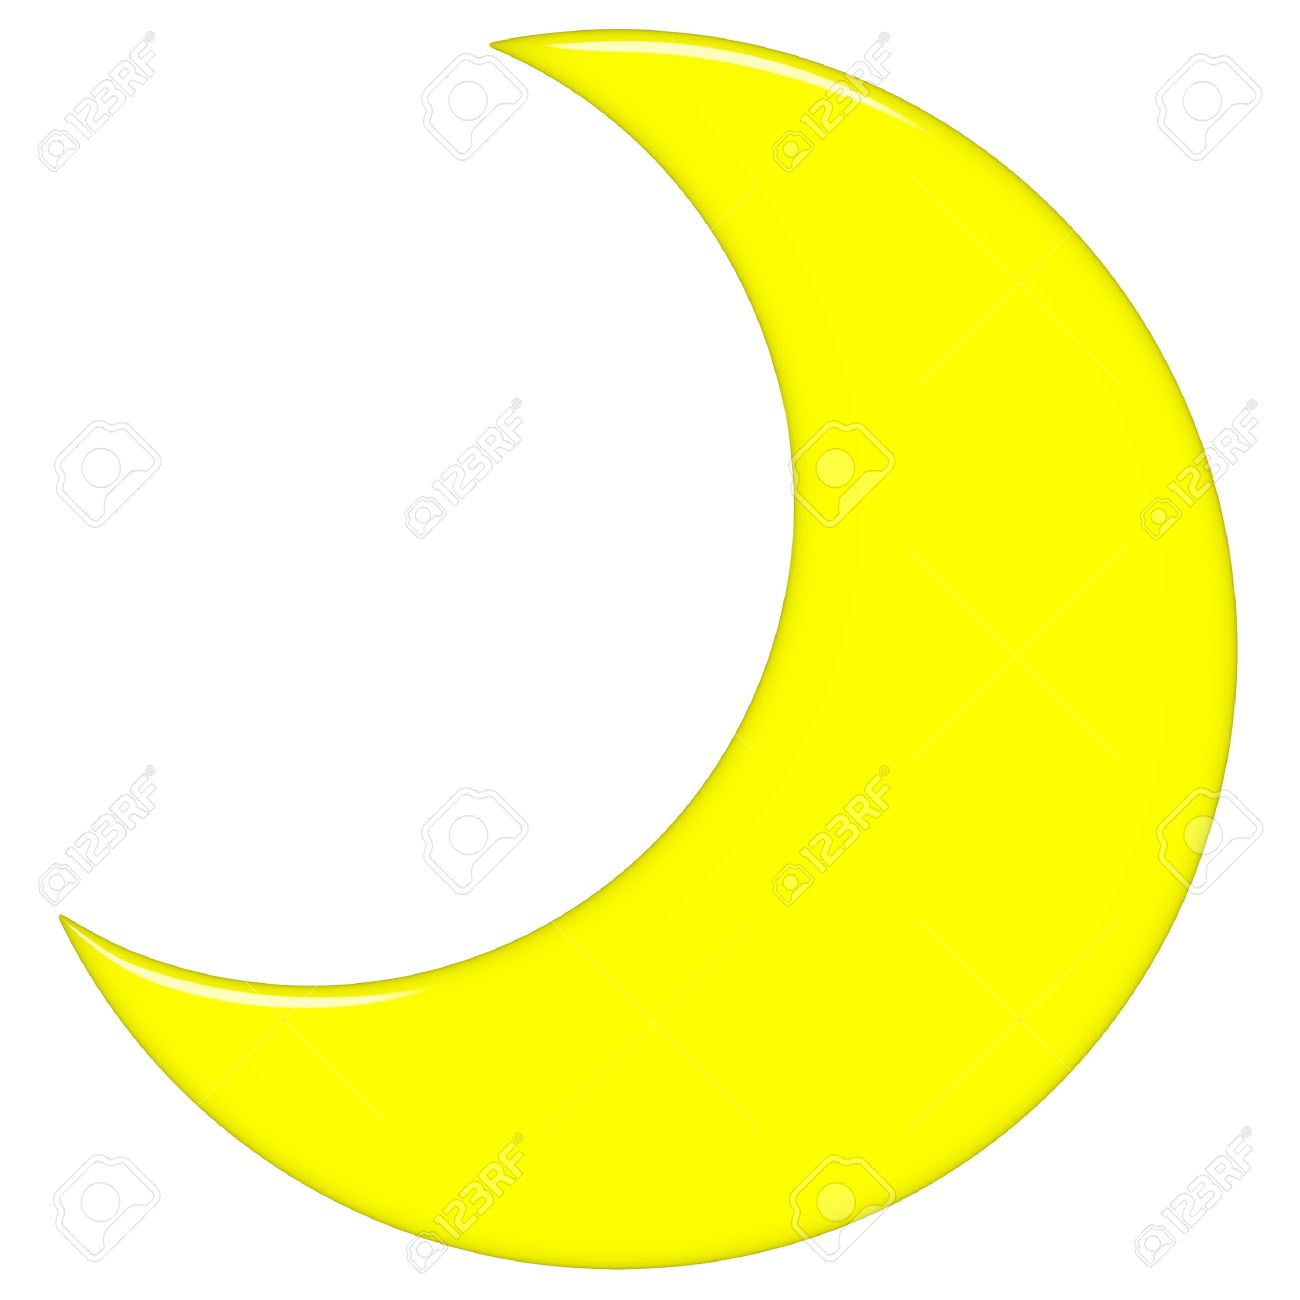 clipart image of moon - photo #46